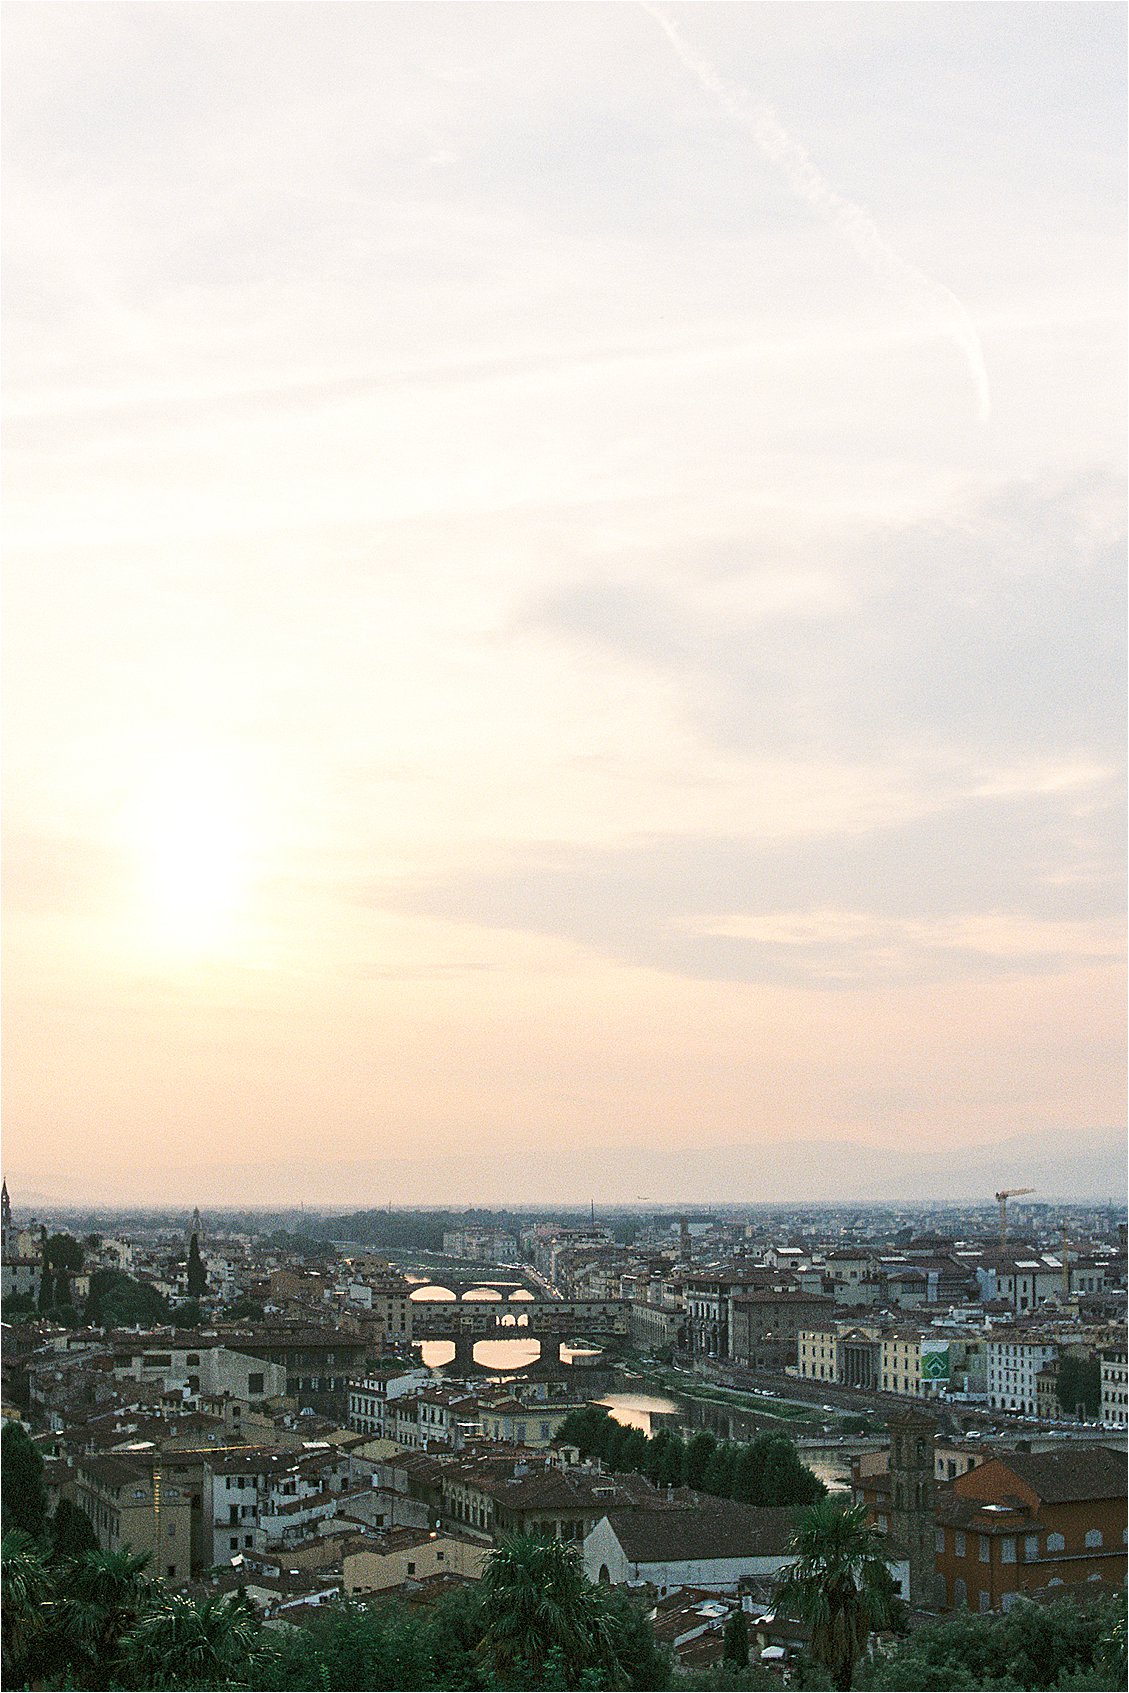 Sunset at Piazzle Michelangelo to view the entire city of Florence